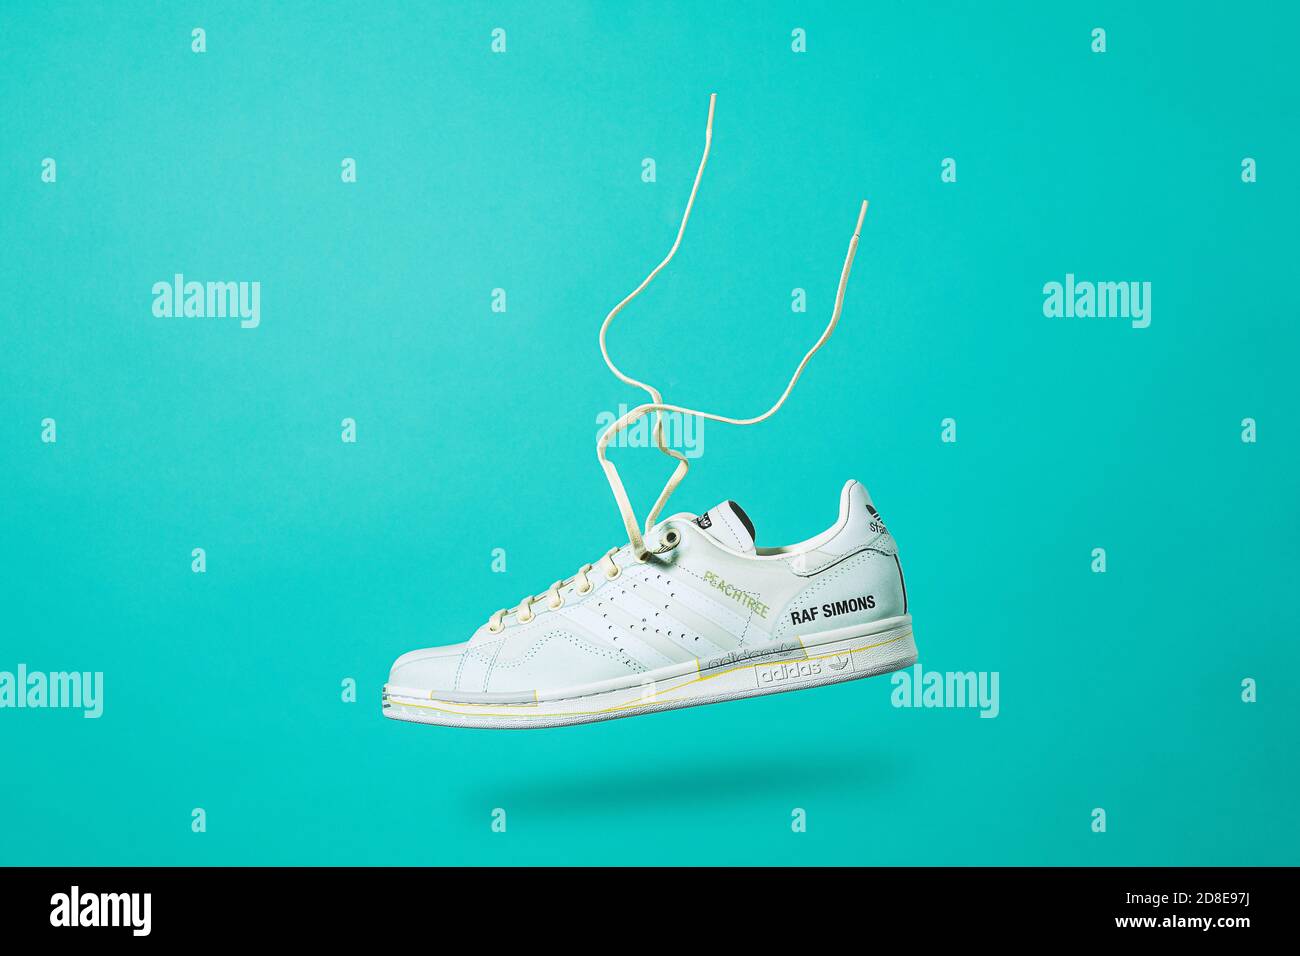 MONTERREY, MEXICO - May 25, 2019: MONTERREY, NL, MEXICO - MAY 24, 2019 : Stan  Smith and Raf Simons famous designers of the classic adidas shoe, isolat  Stock Photo - Alamy